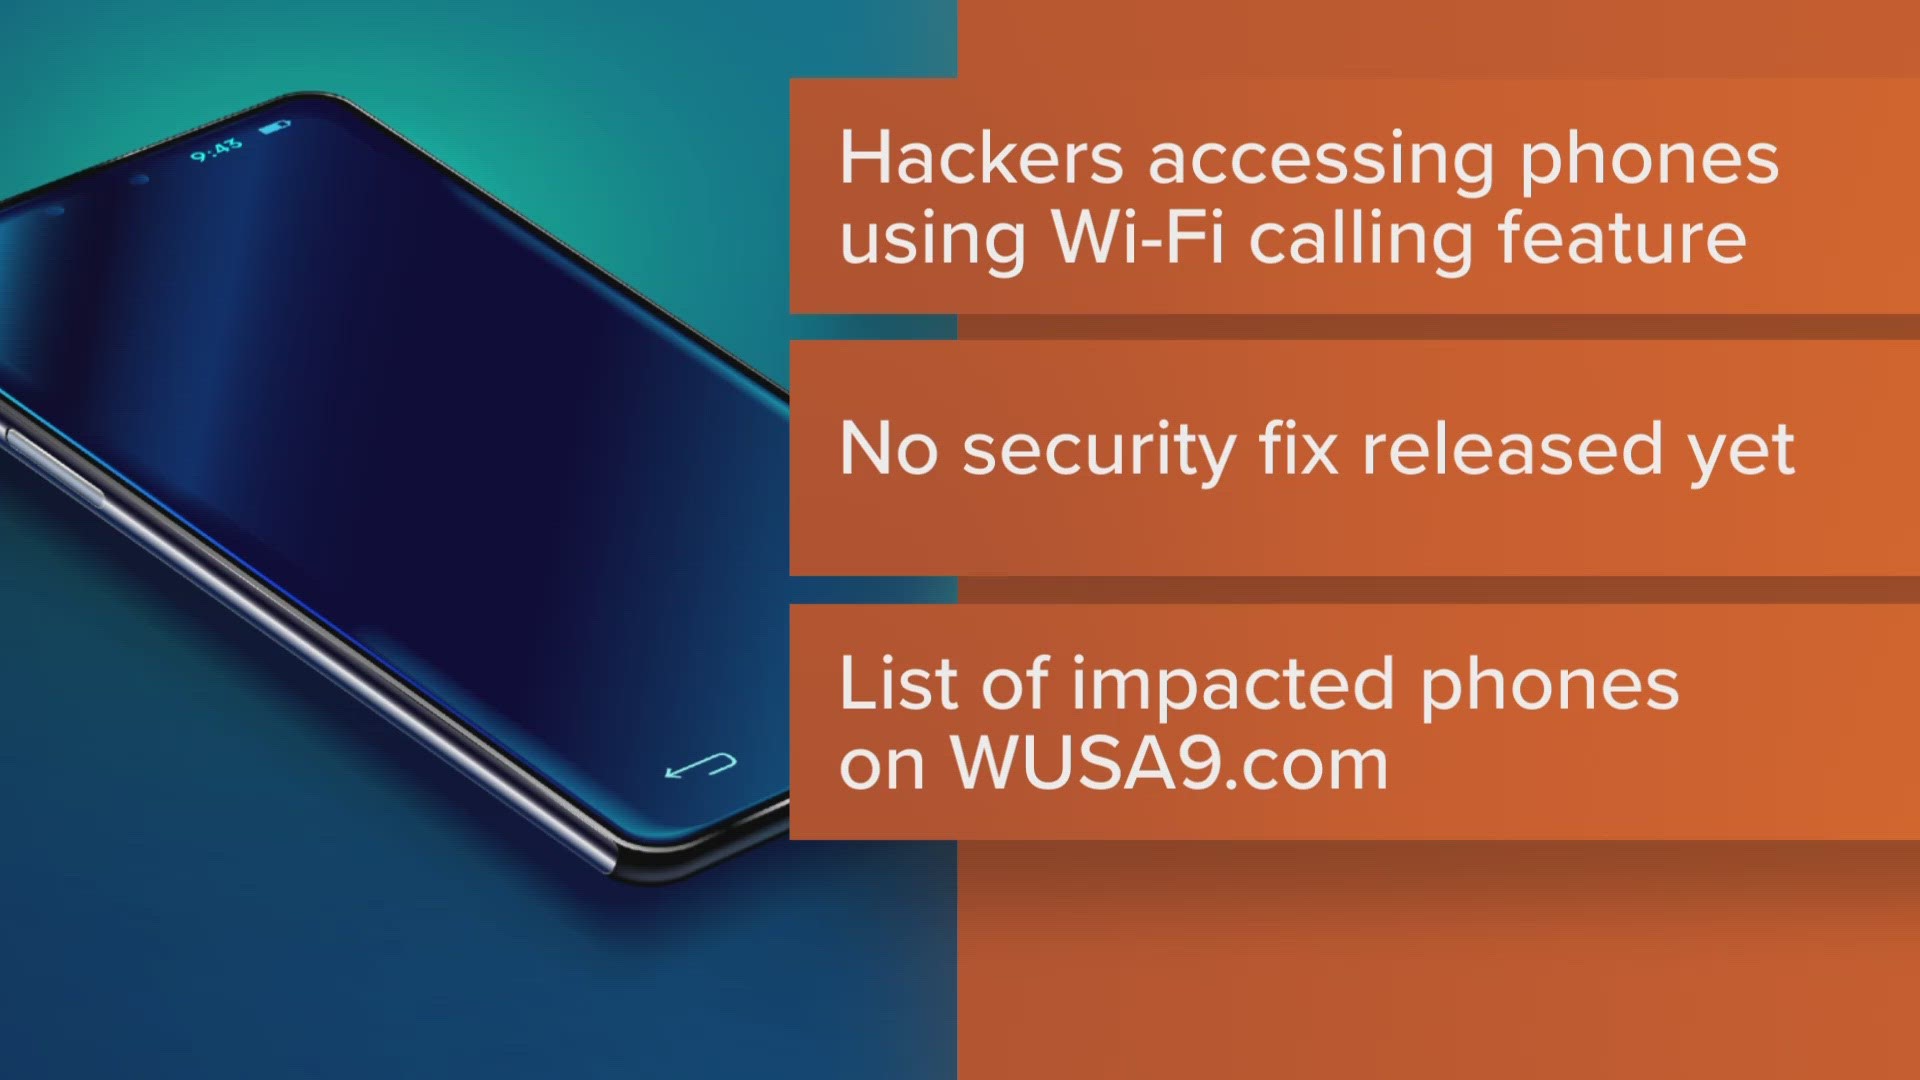 All a hacker would need is the victim’s phone number, which can be used to compromise the phone without the user knowing anything is wrong.